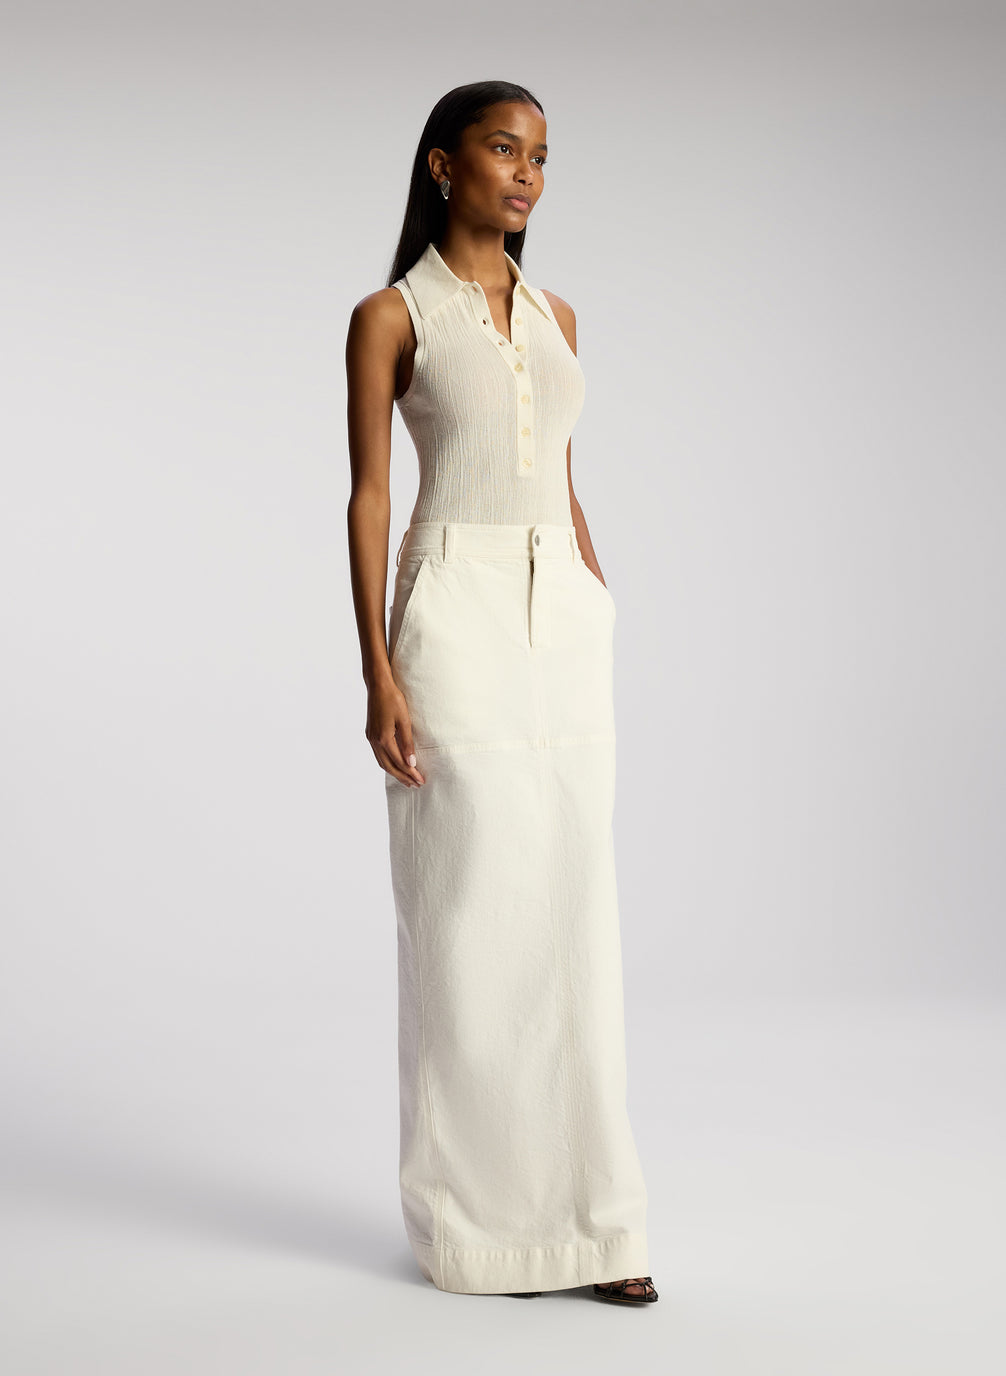 side view of woman wearing white sleeveless collared shirt and whit maxi skirt